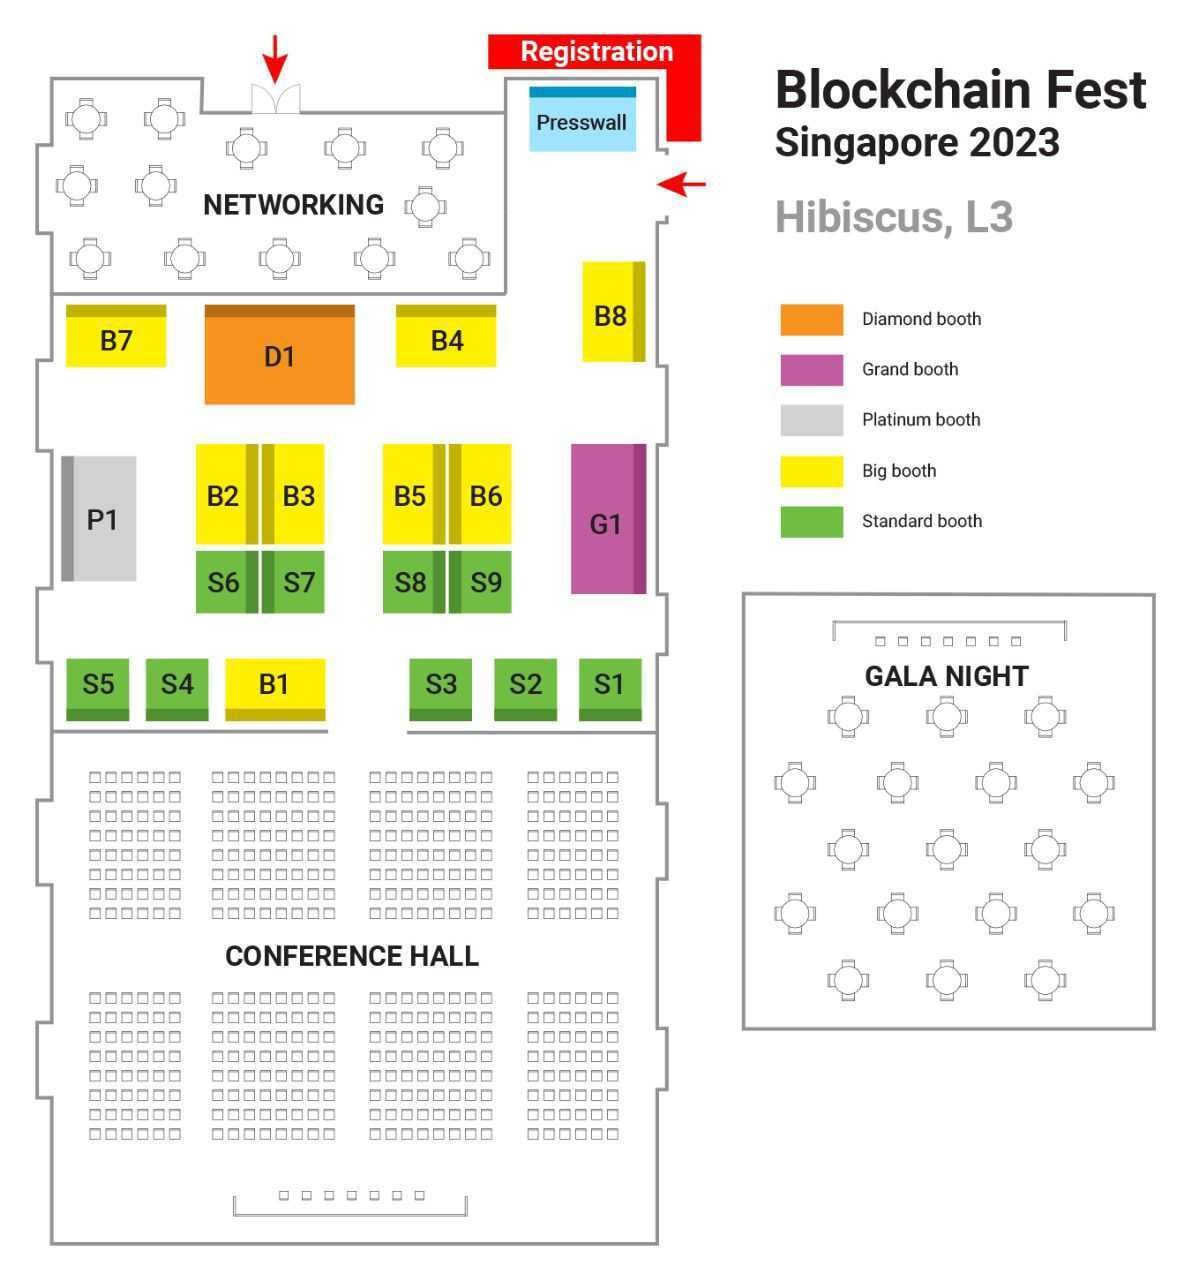 PrimeXBT To Speak At Blockchain Fest Singapore 2023, Visit Our Exclusive Booth - photo 2023 01 25 16 19 26